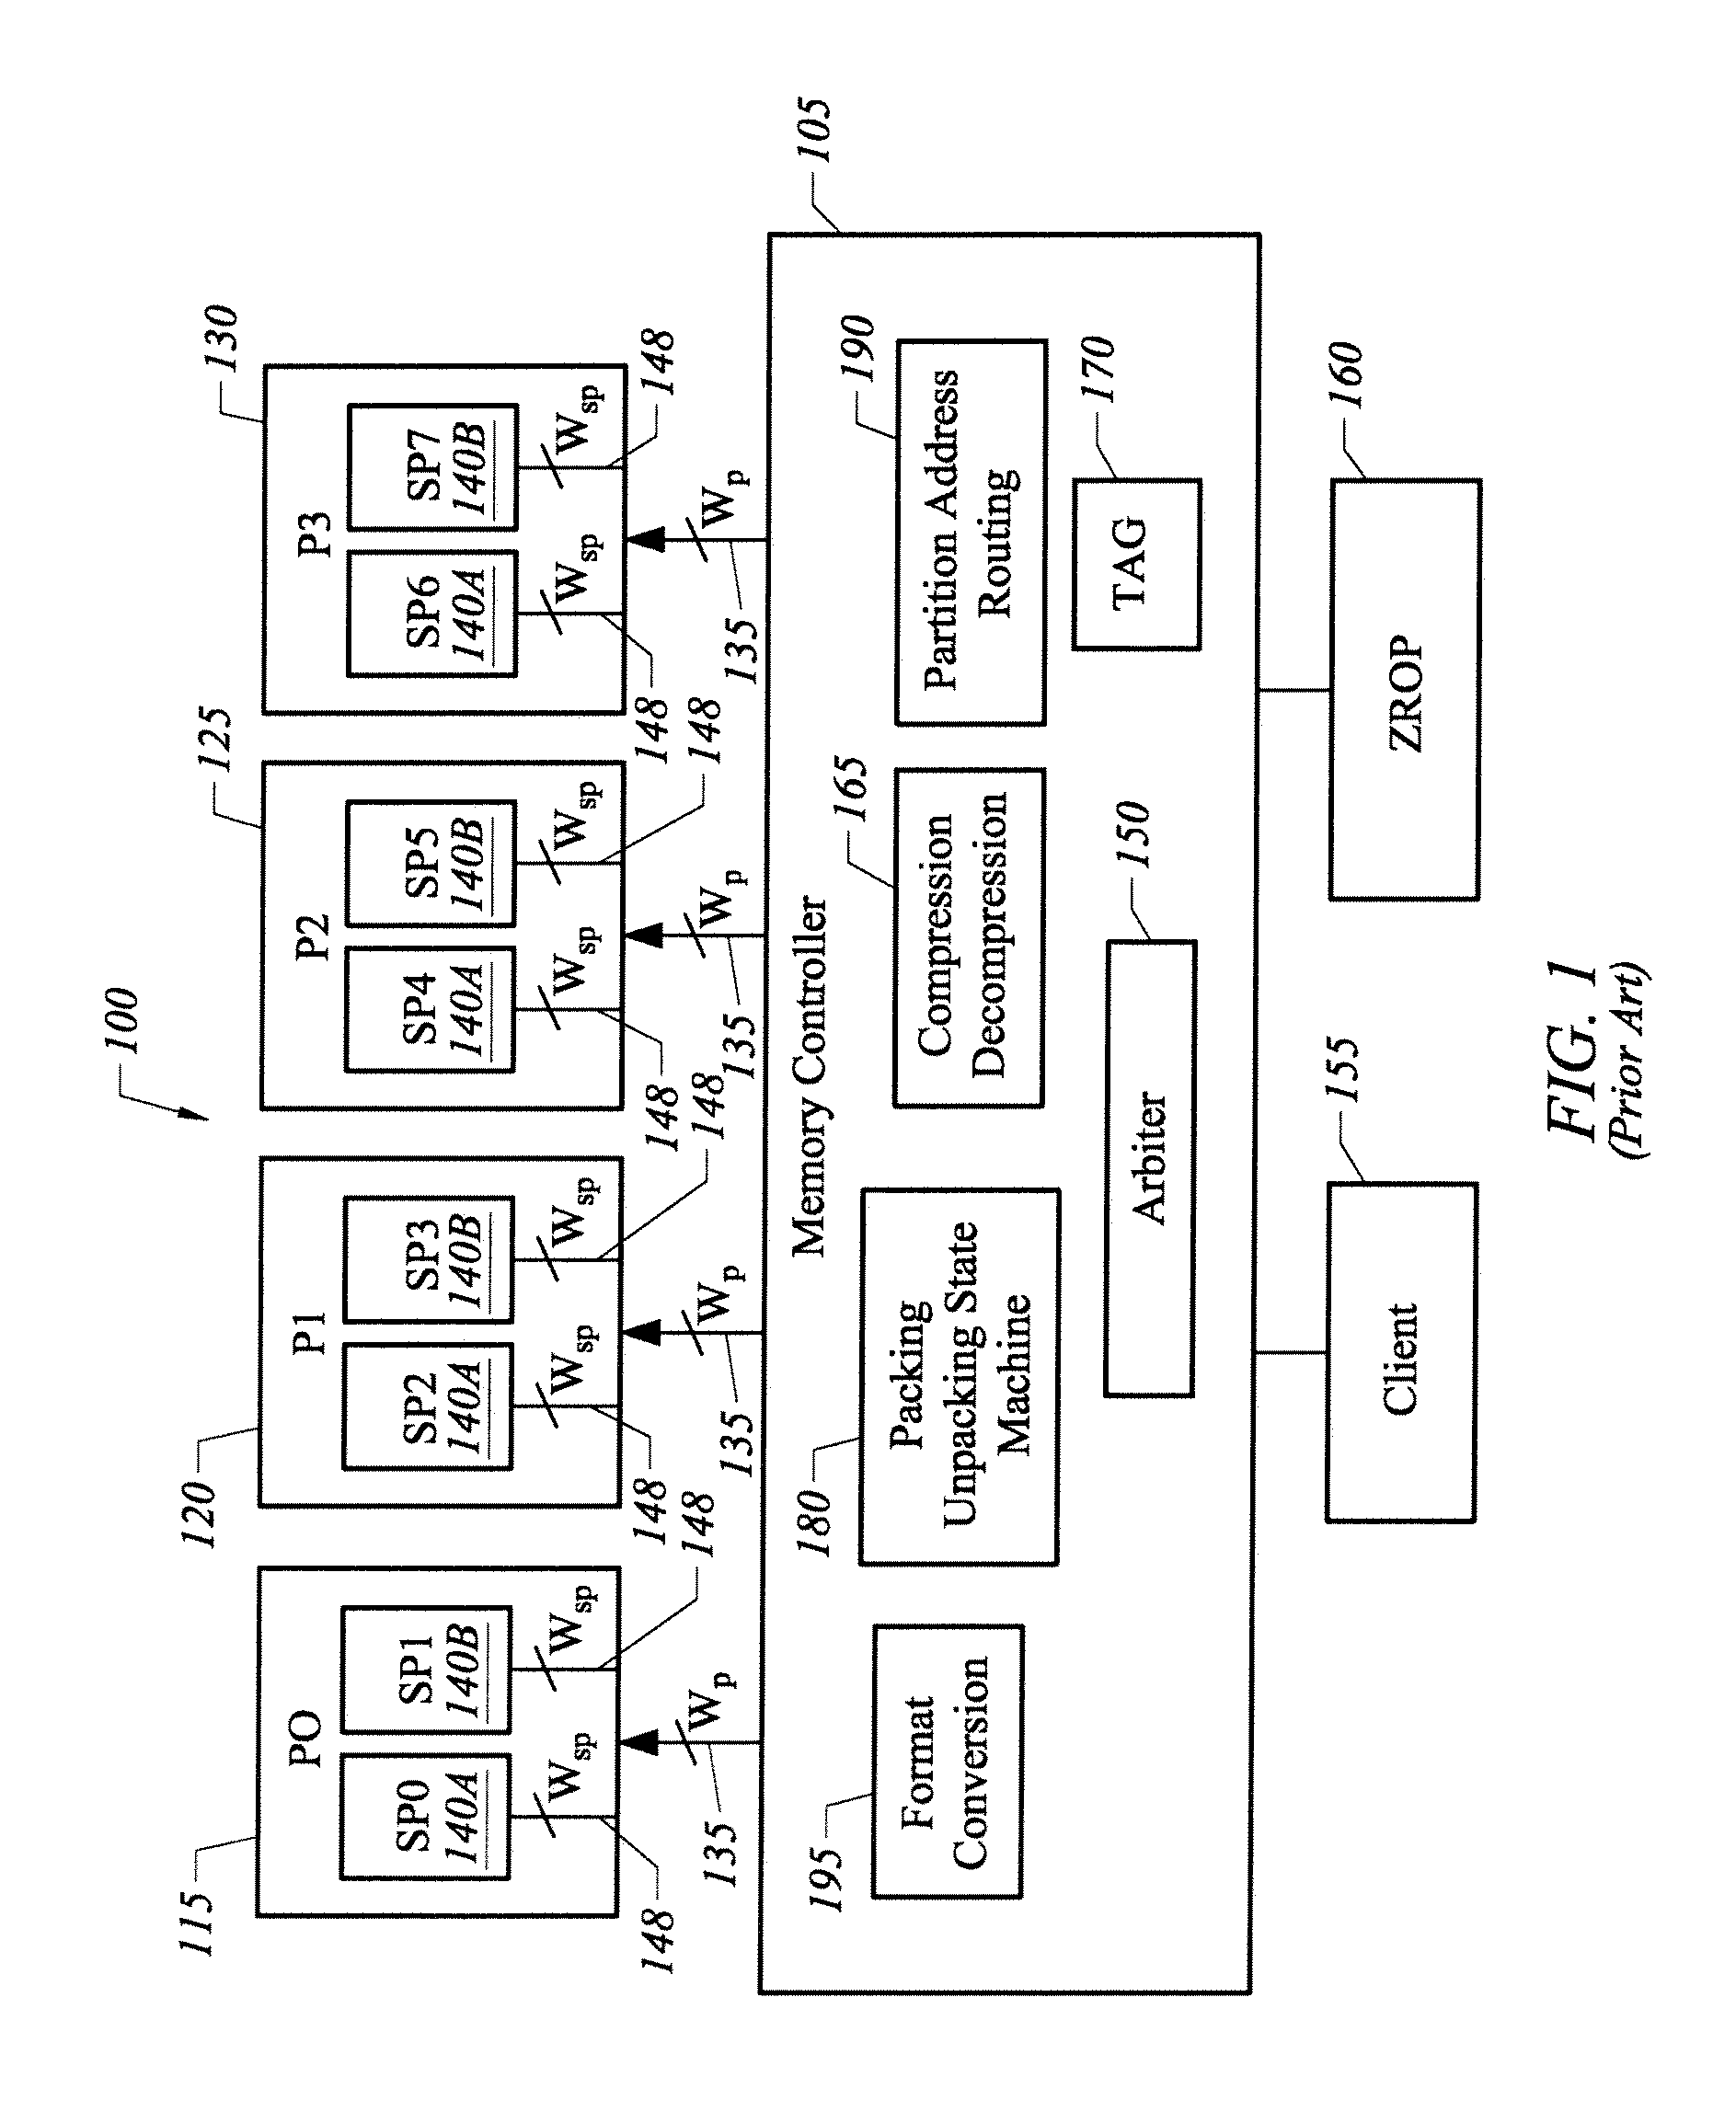 Graphics system with virtual memory pages and non-power of two number of memory elements